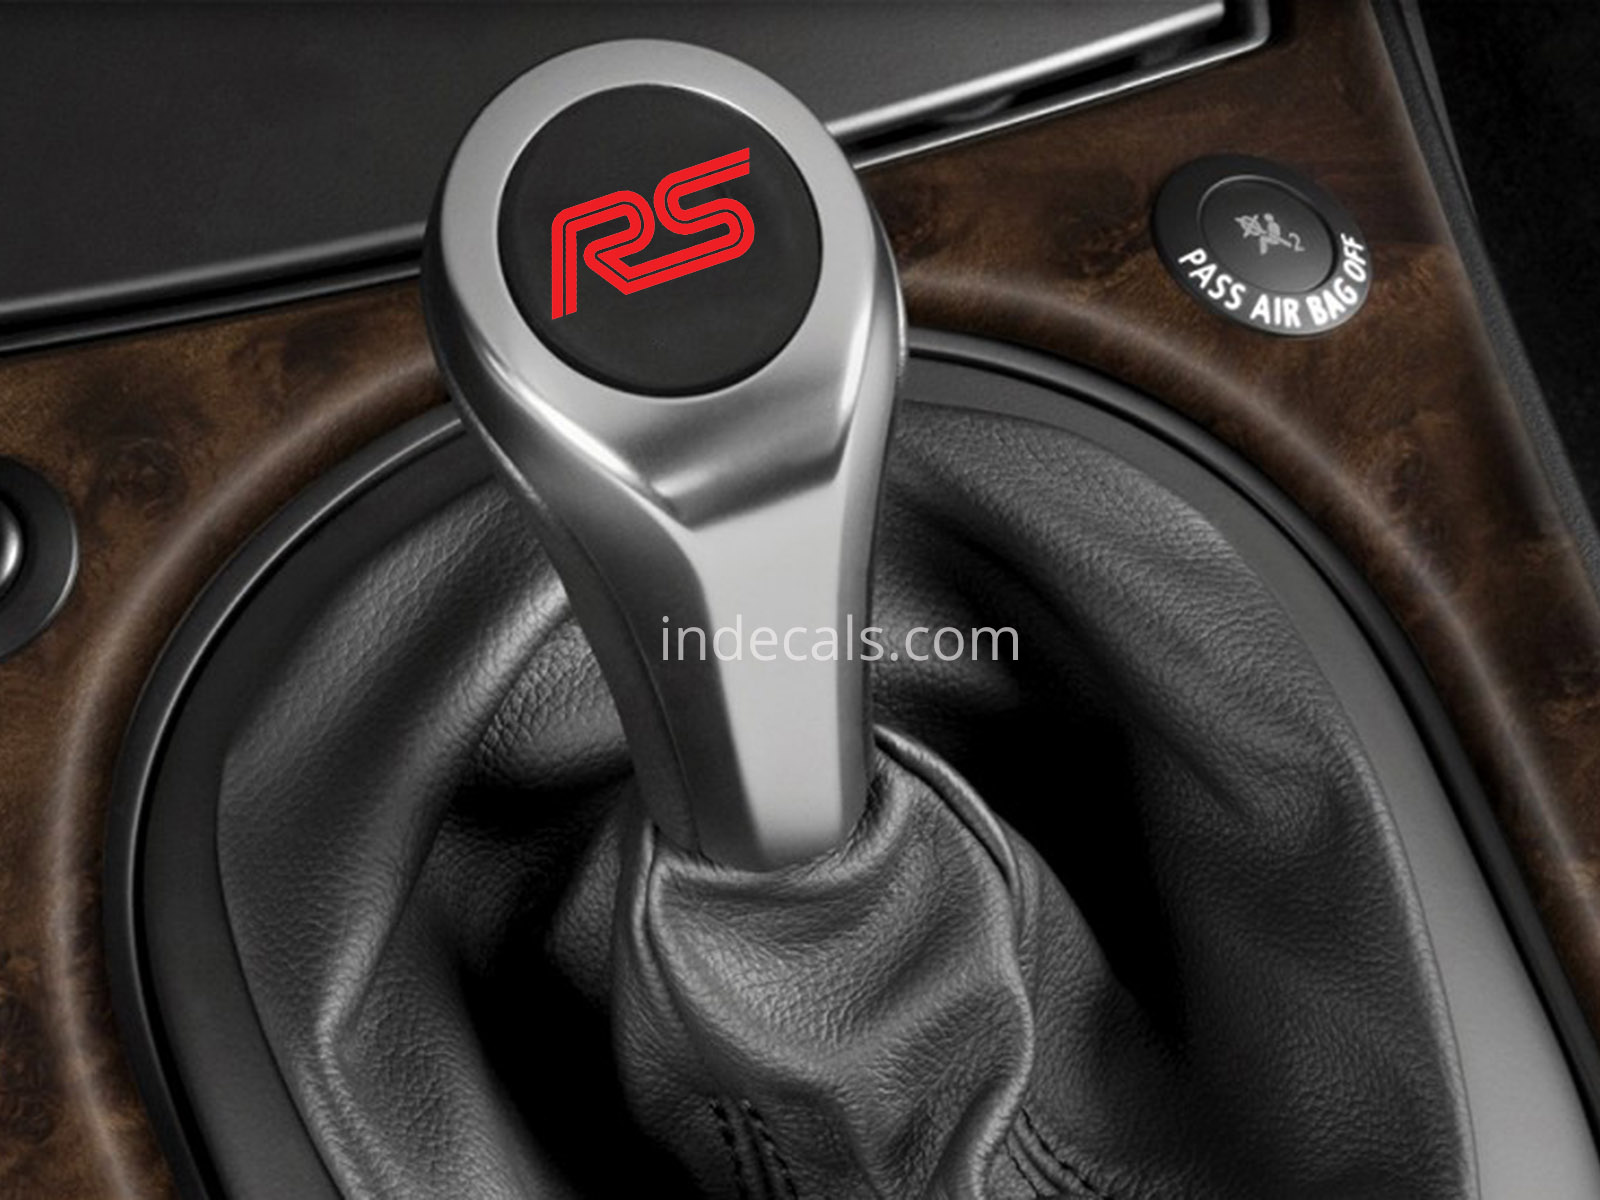 3 x Ford RS Stickers for Gear Knob - Red